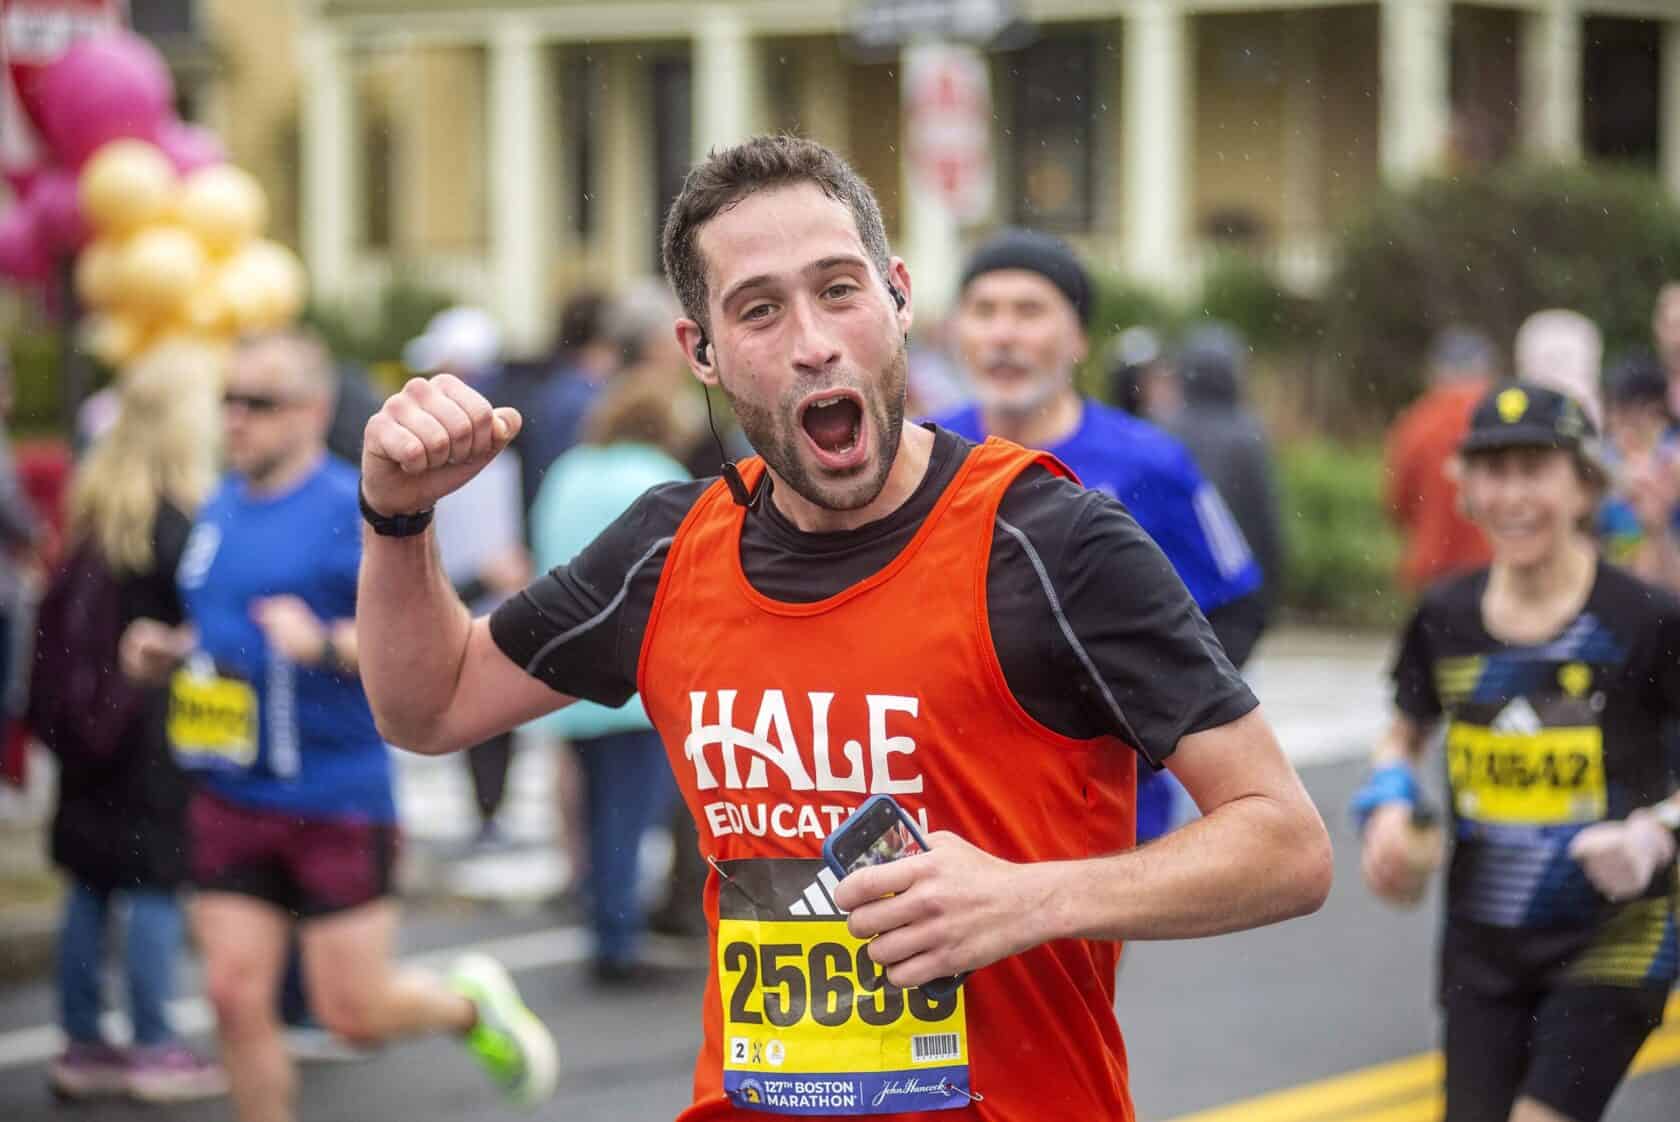 A Boston Marathon runner smiles at spectators as he completes the race